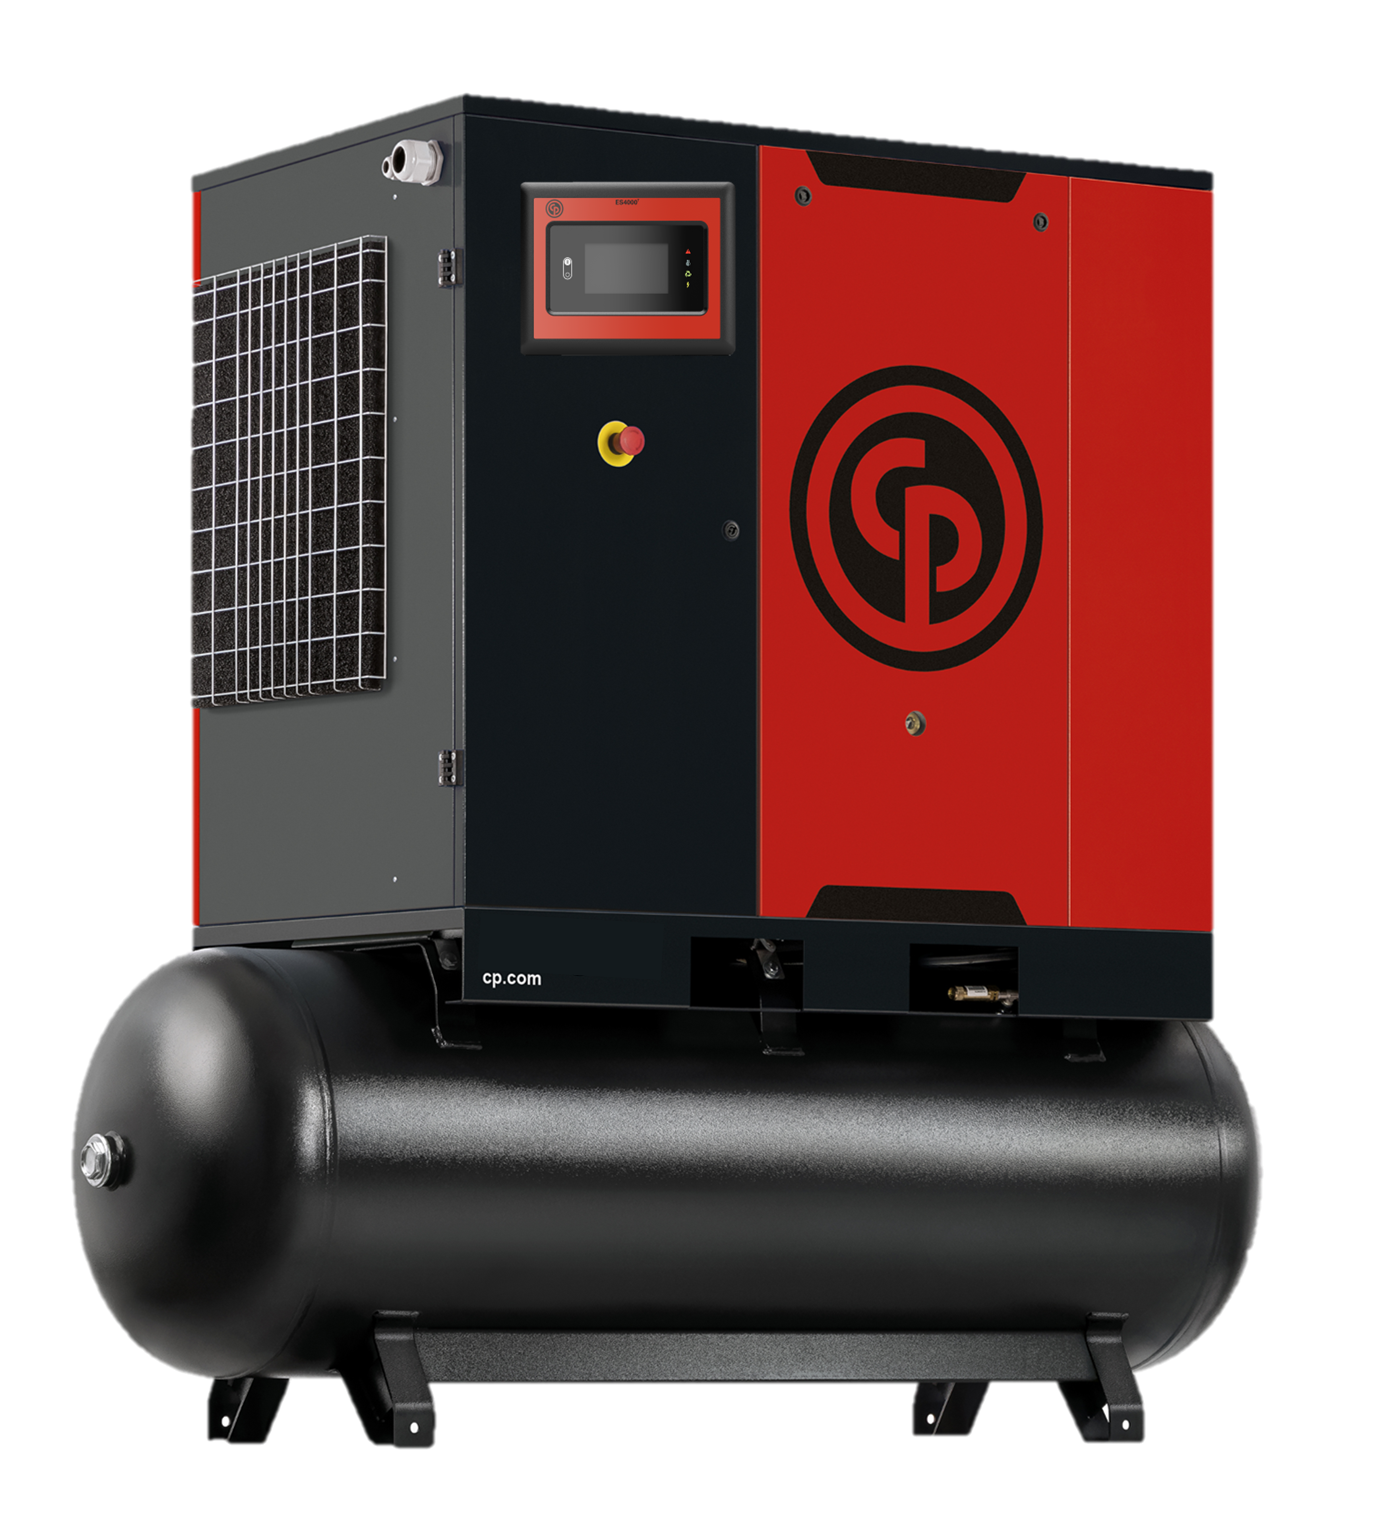 Chicago Pneumatic CPBg 20 HP Tank Mount Rotary Screw Air Compressor | 83.6 CFM@150 PSI, 208-230/460 volt, 3 Phase | 4152030658